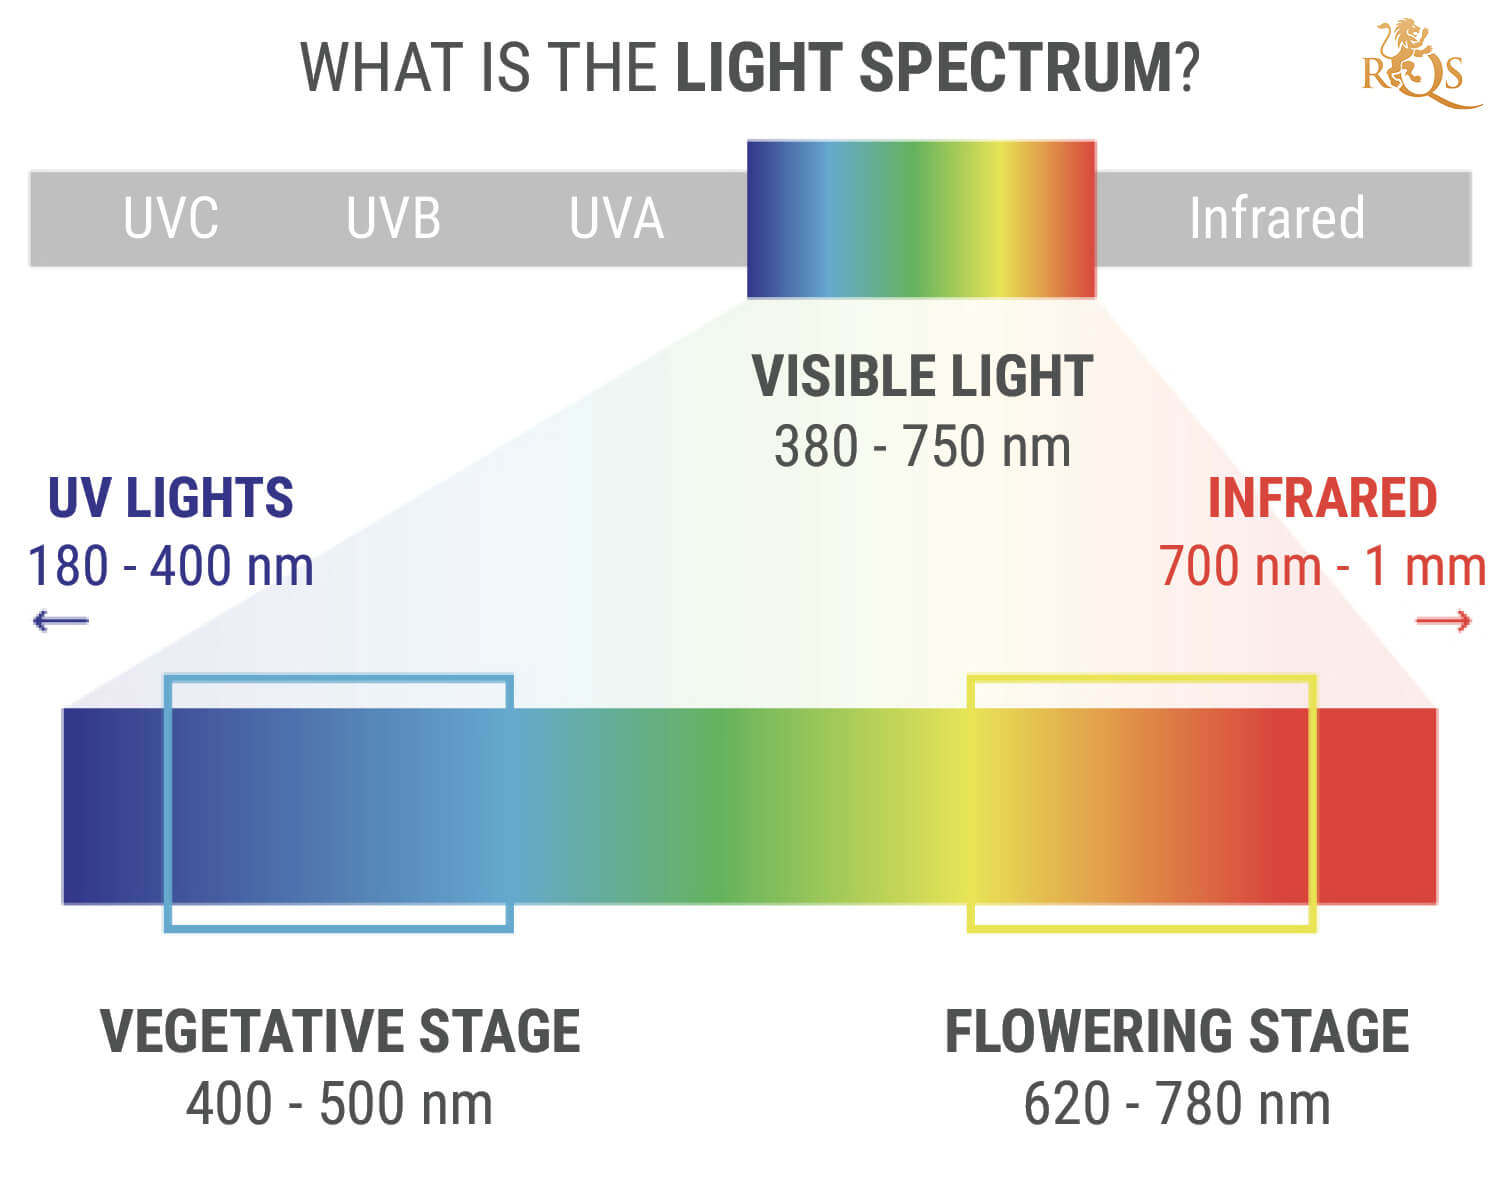 What Is The Light Spectrum?